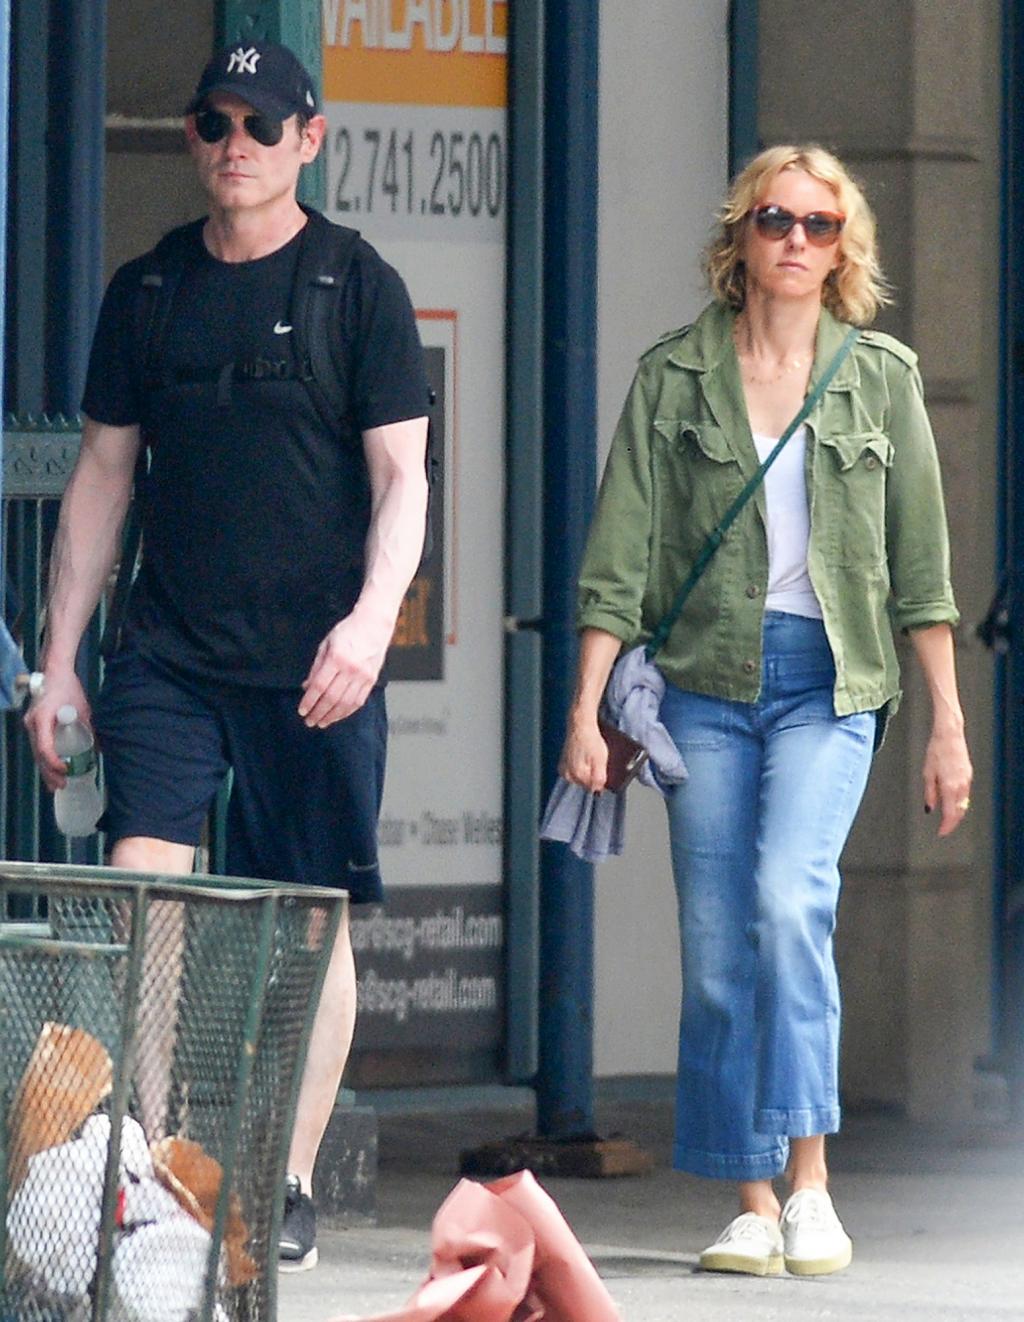 Naomi Watts Dating Her Gypsy Costar Billy Crudup As They Take a Stroll in New York City